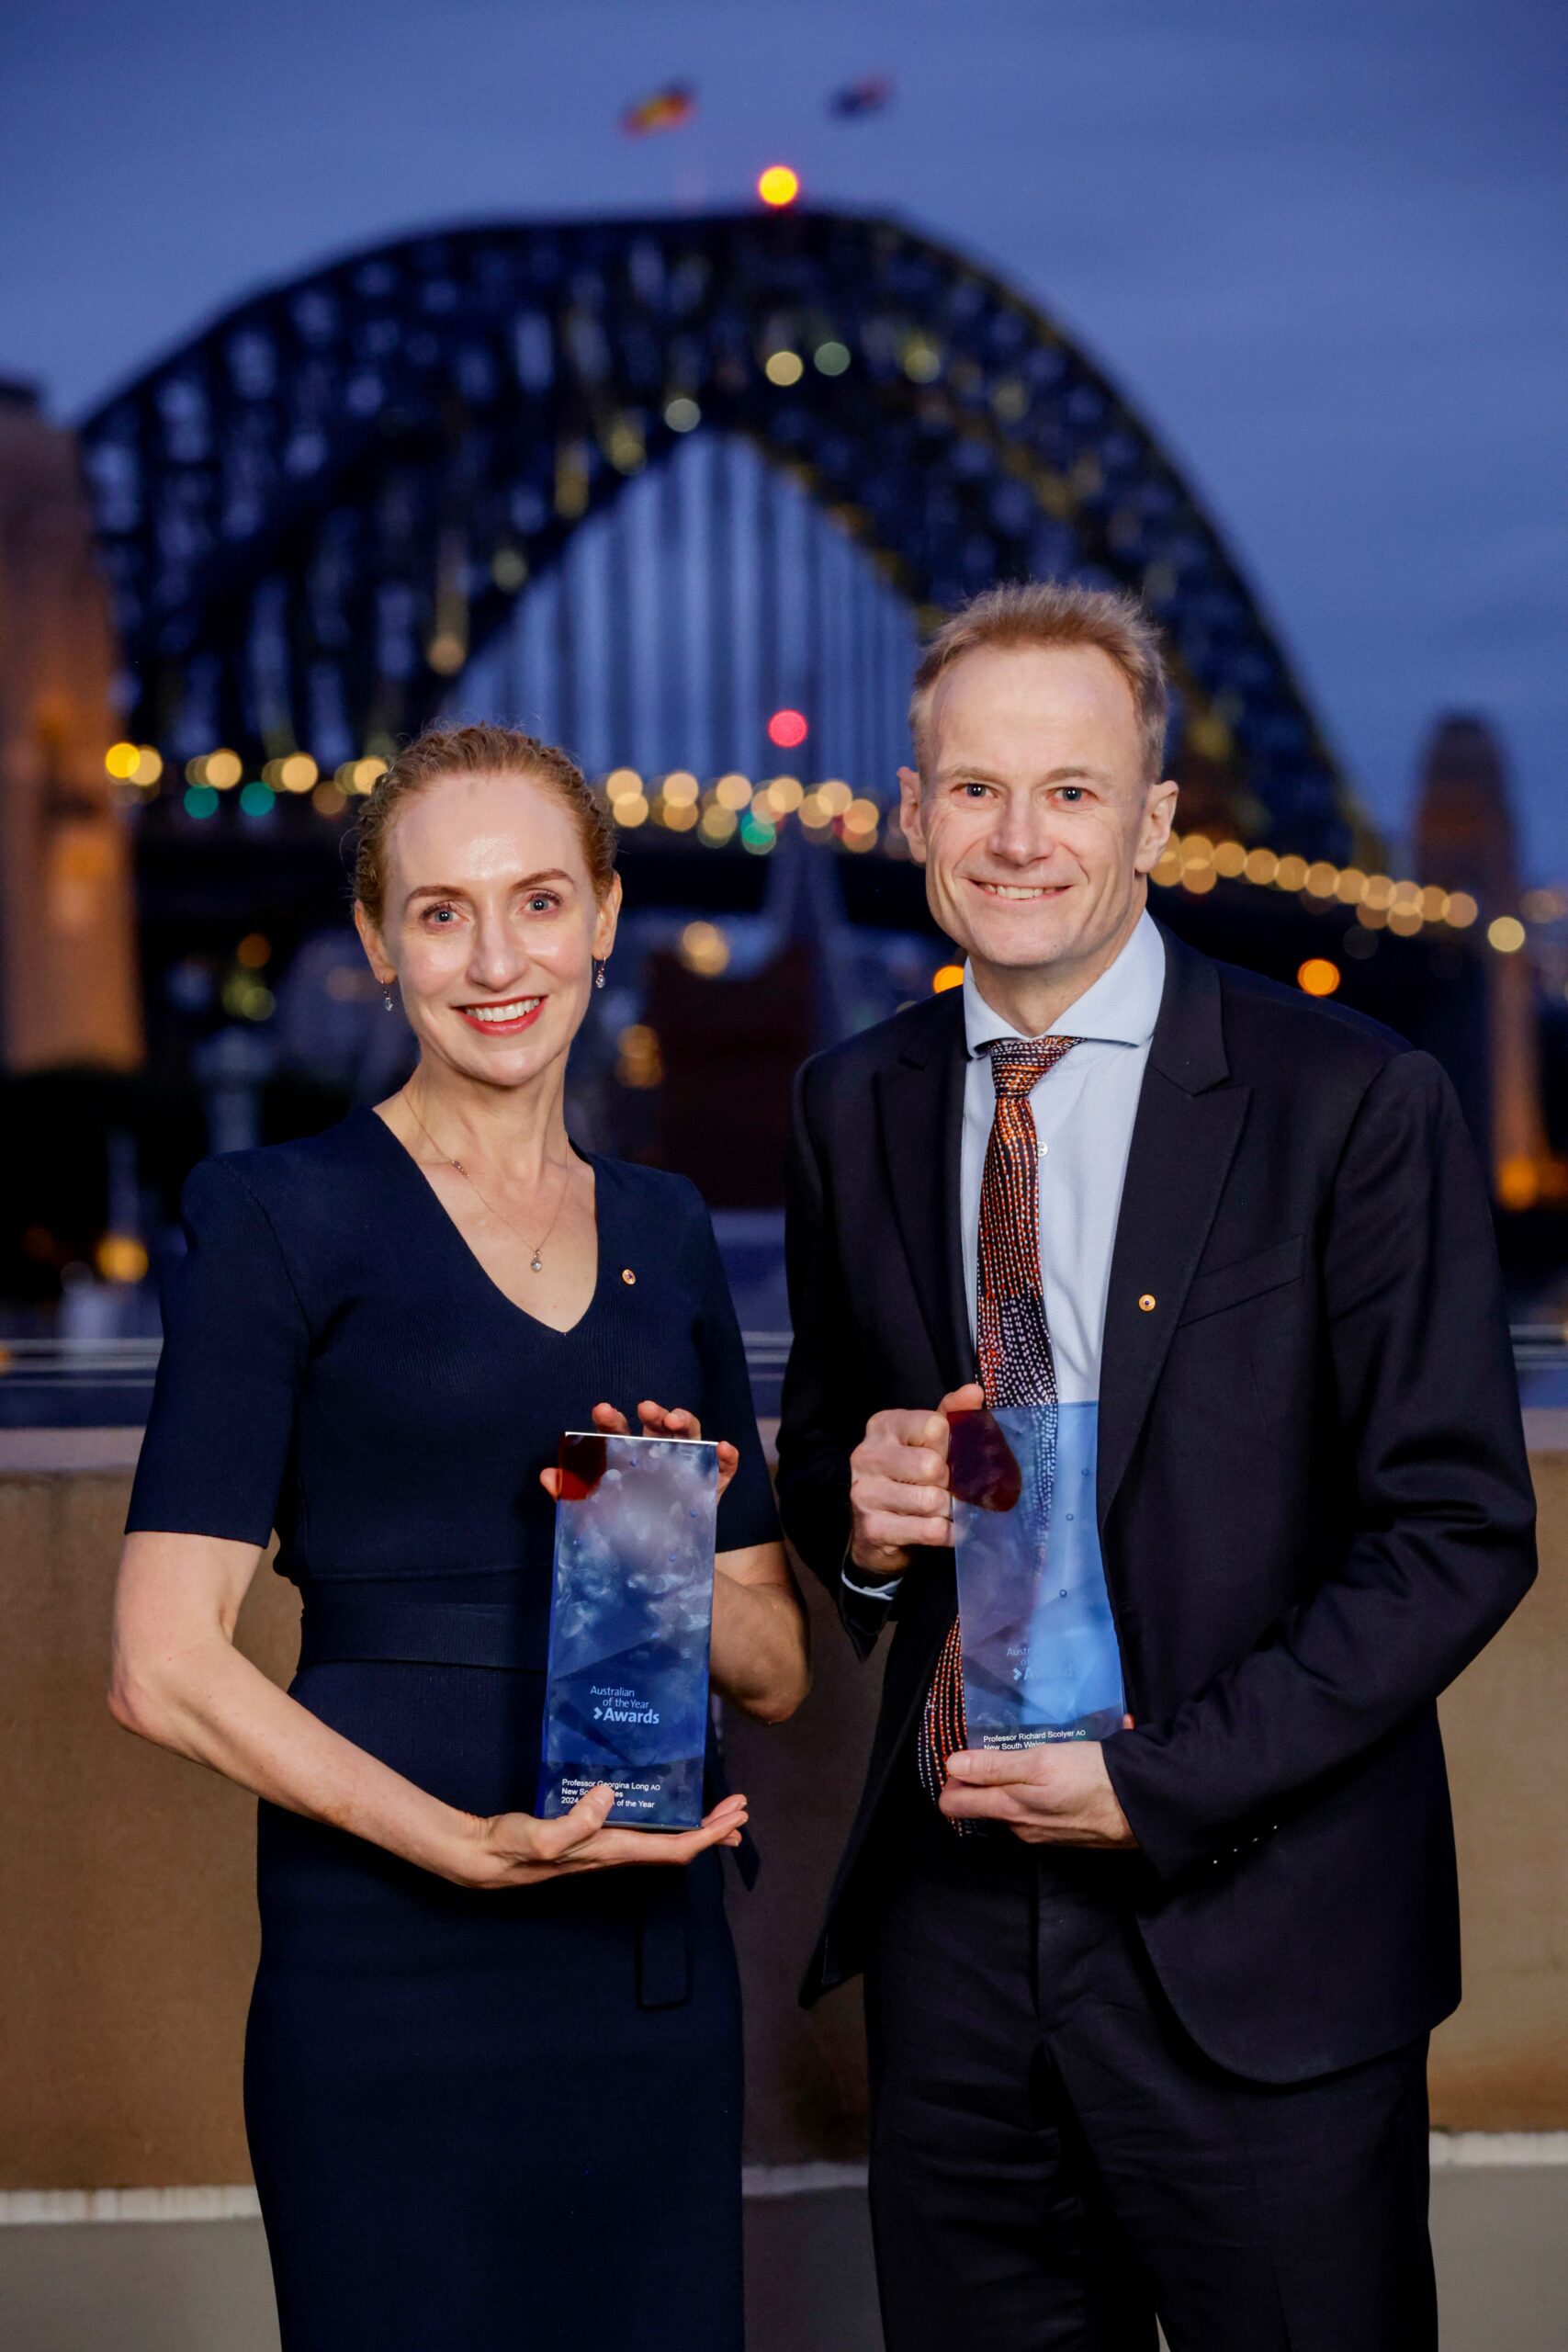 A man and a woman holding trophies stand in front of the Sydney Harbour bridge at night.